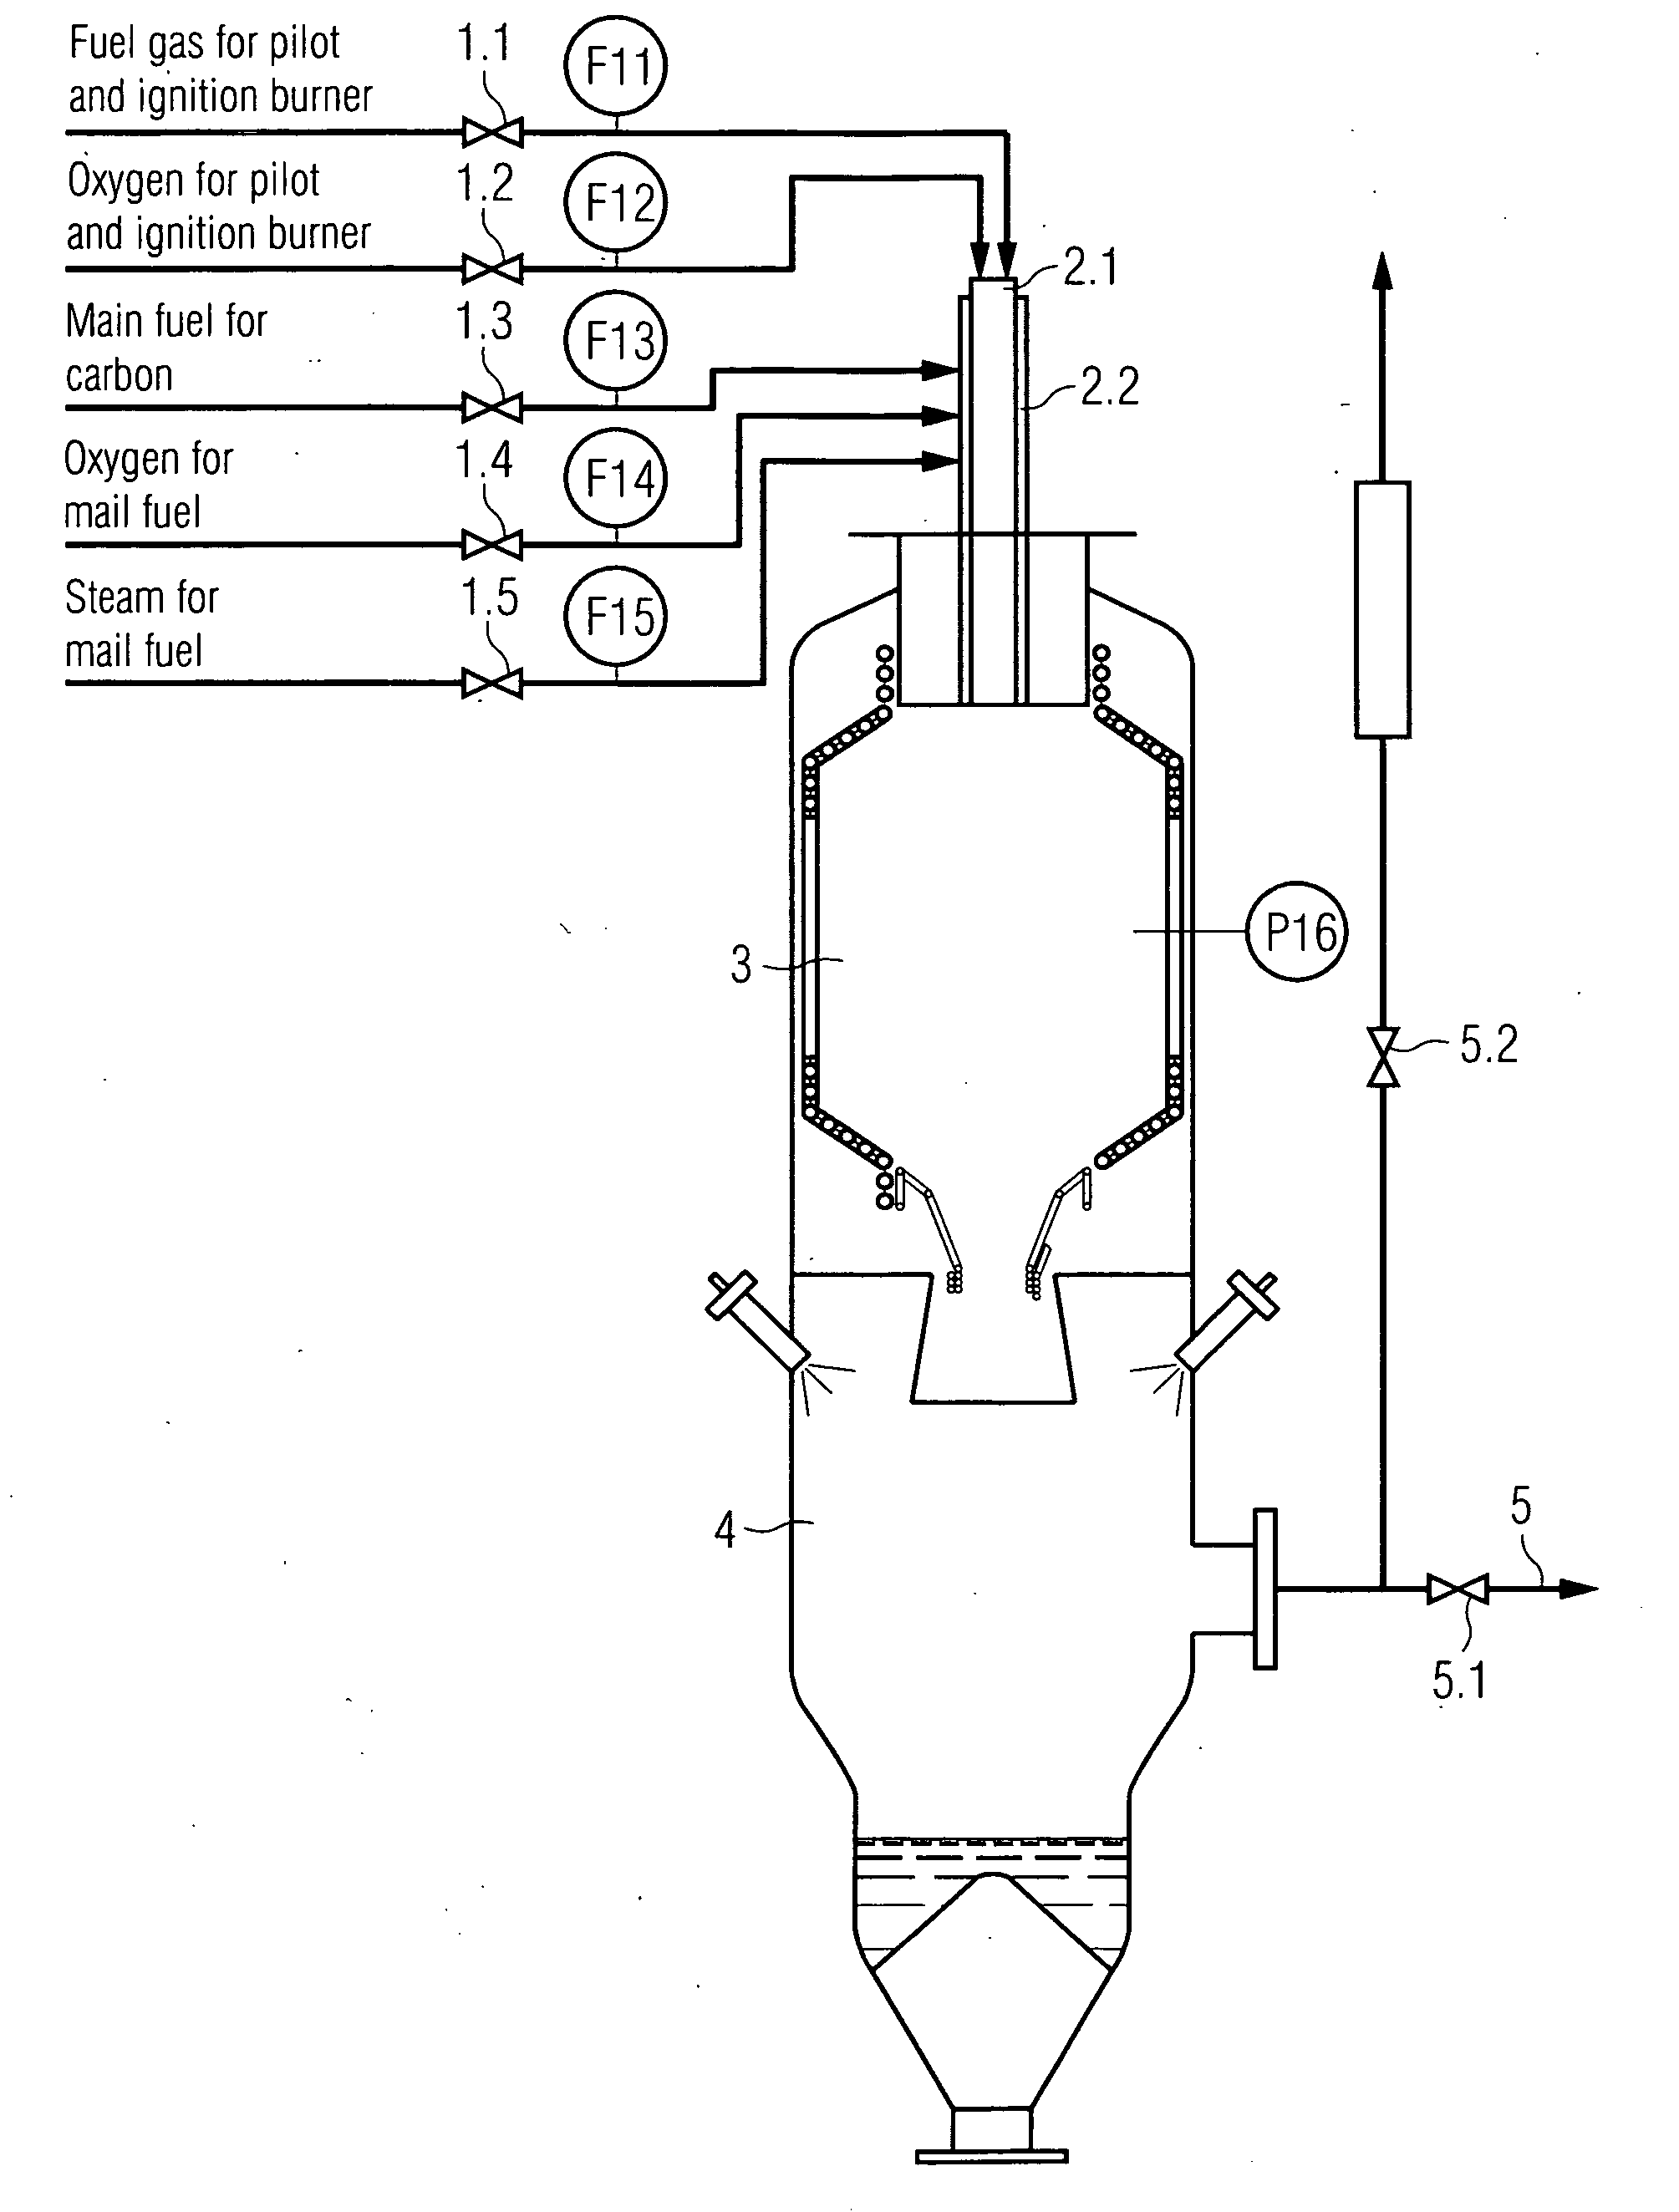 Method for the selective safety-related monitoring of entrained-flow gasification reactors